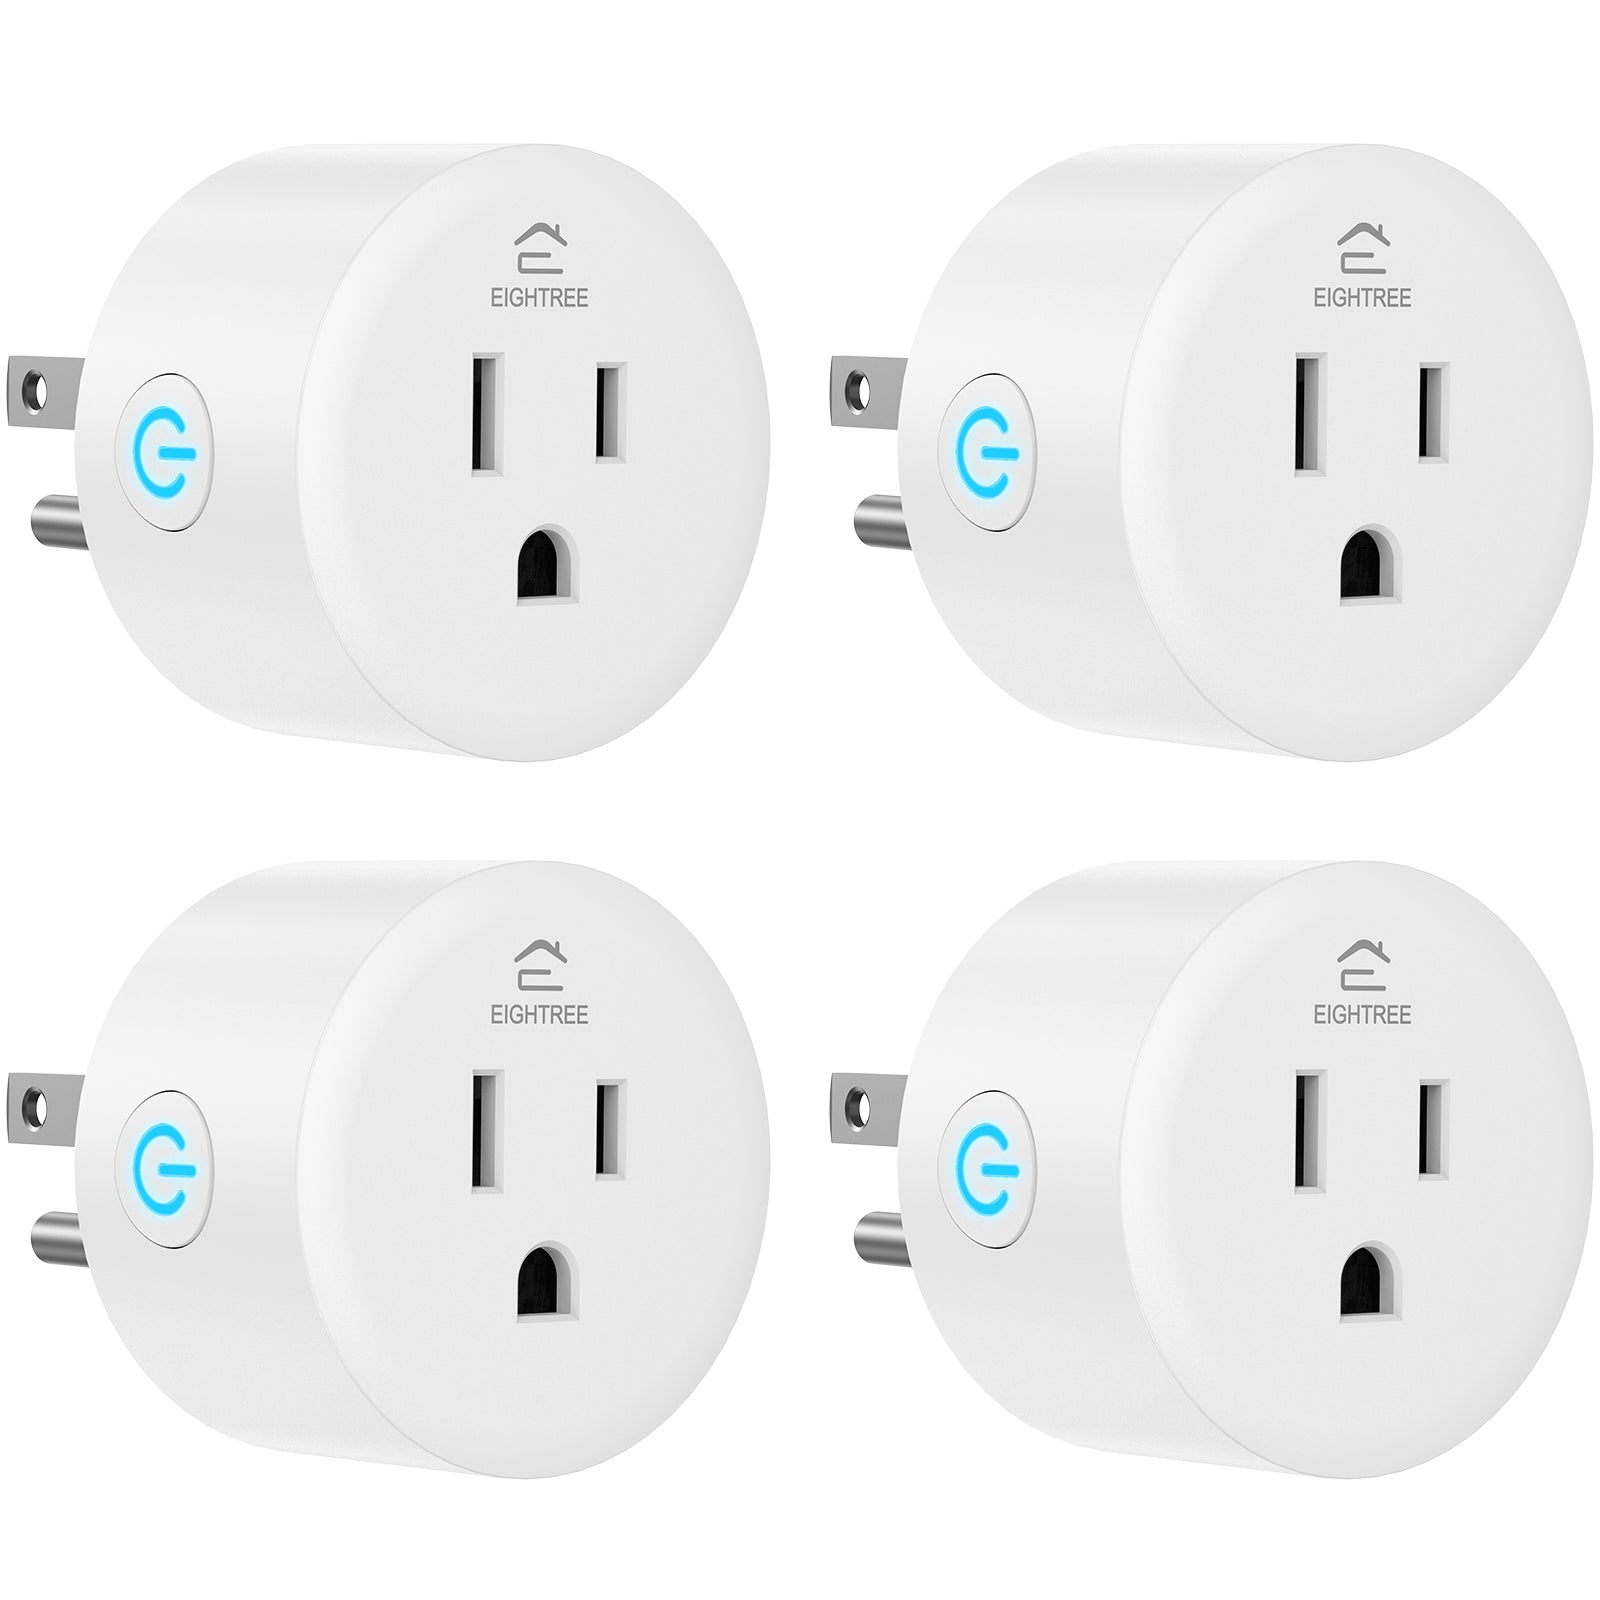 Hey all. I got these smart plugs from Lowe's for $11. They work with Google  home and seem very reliable. For anyone looking to get some timers for  their dragons lights, I